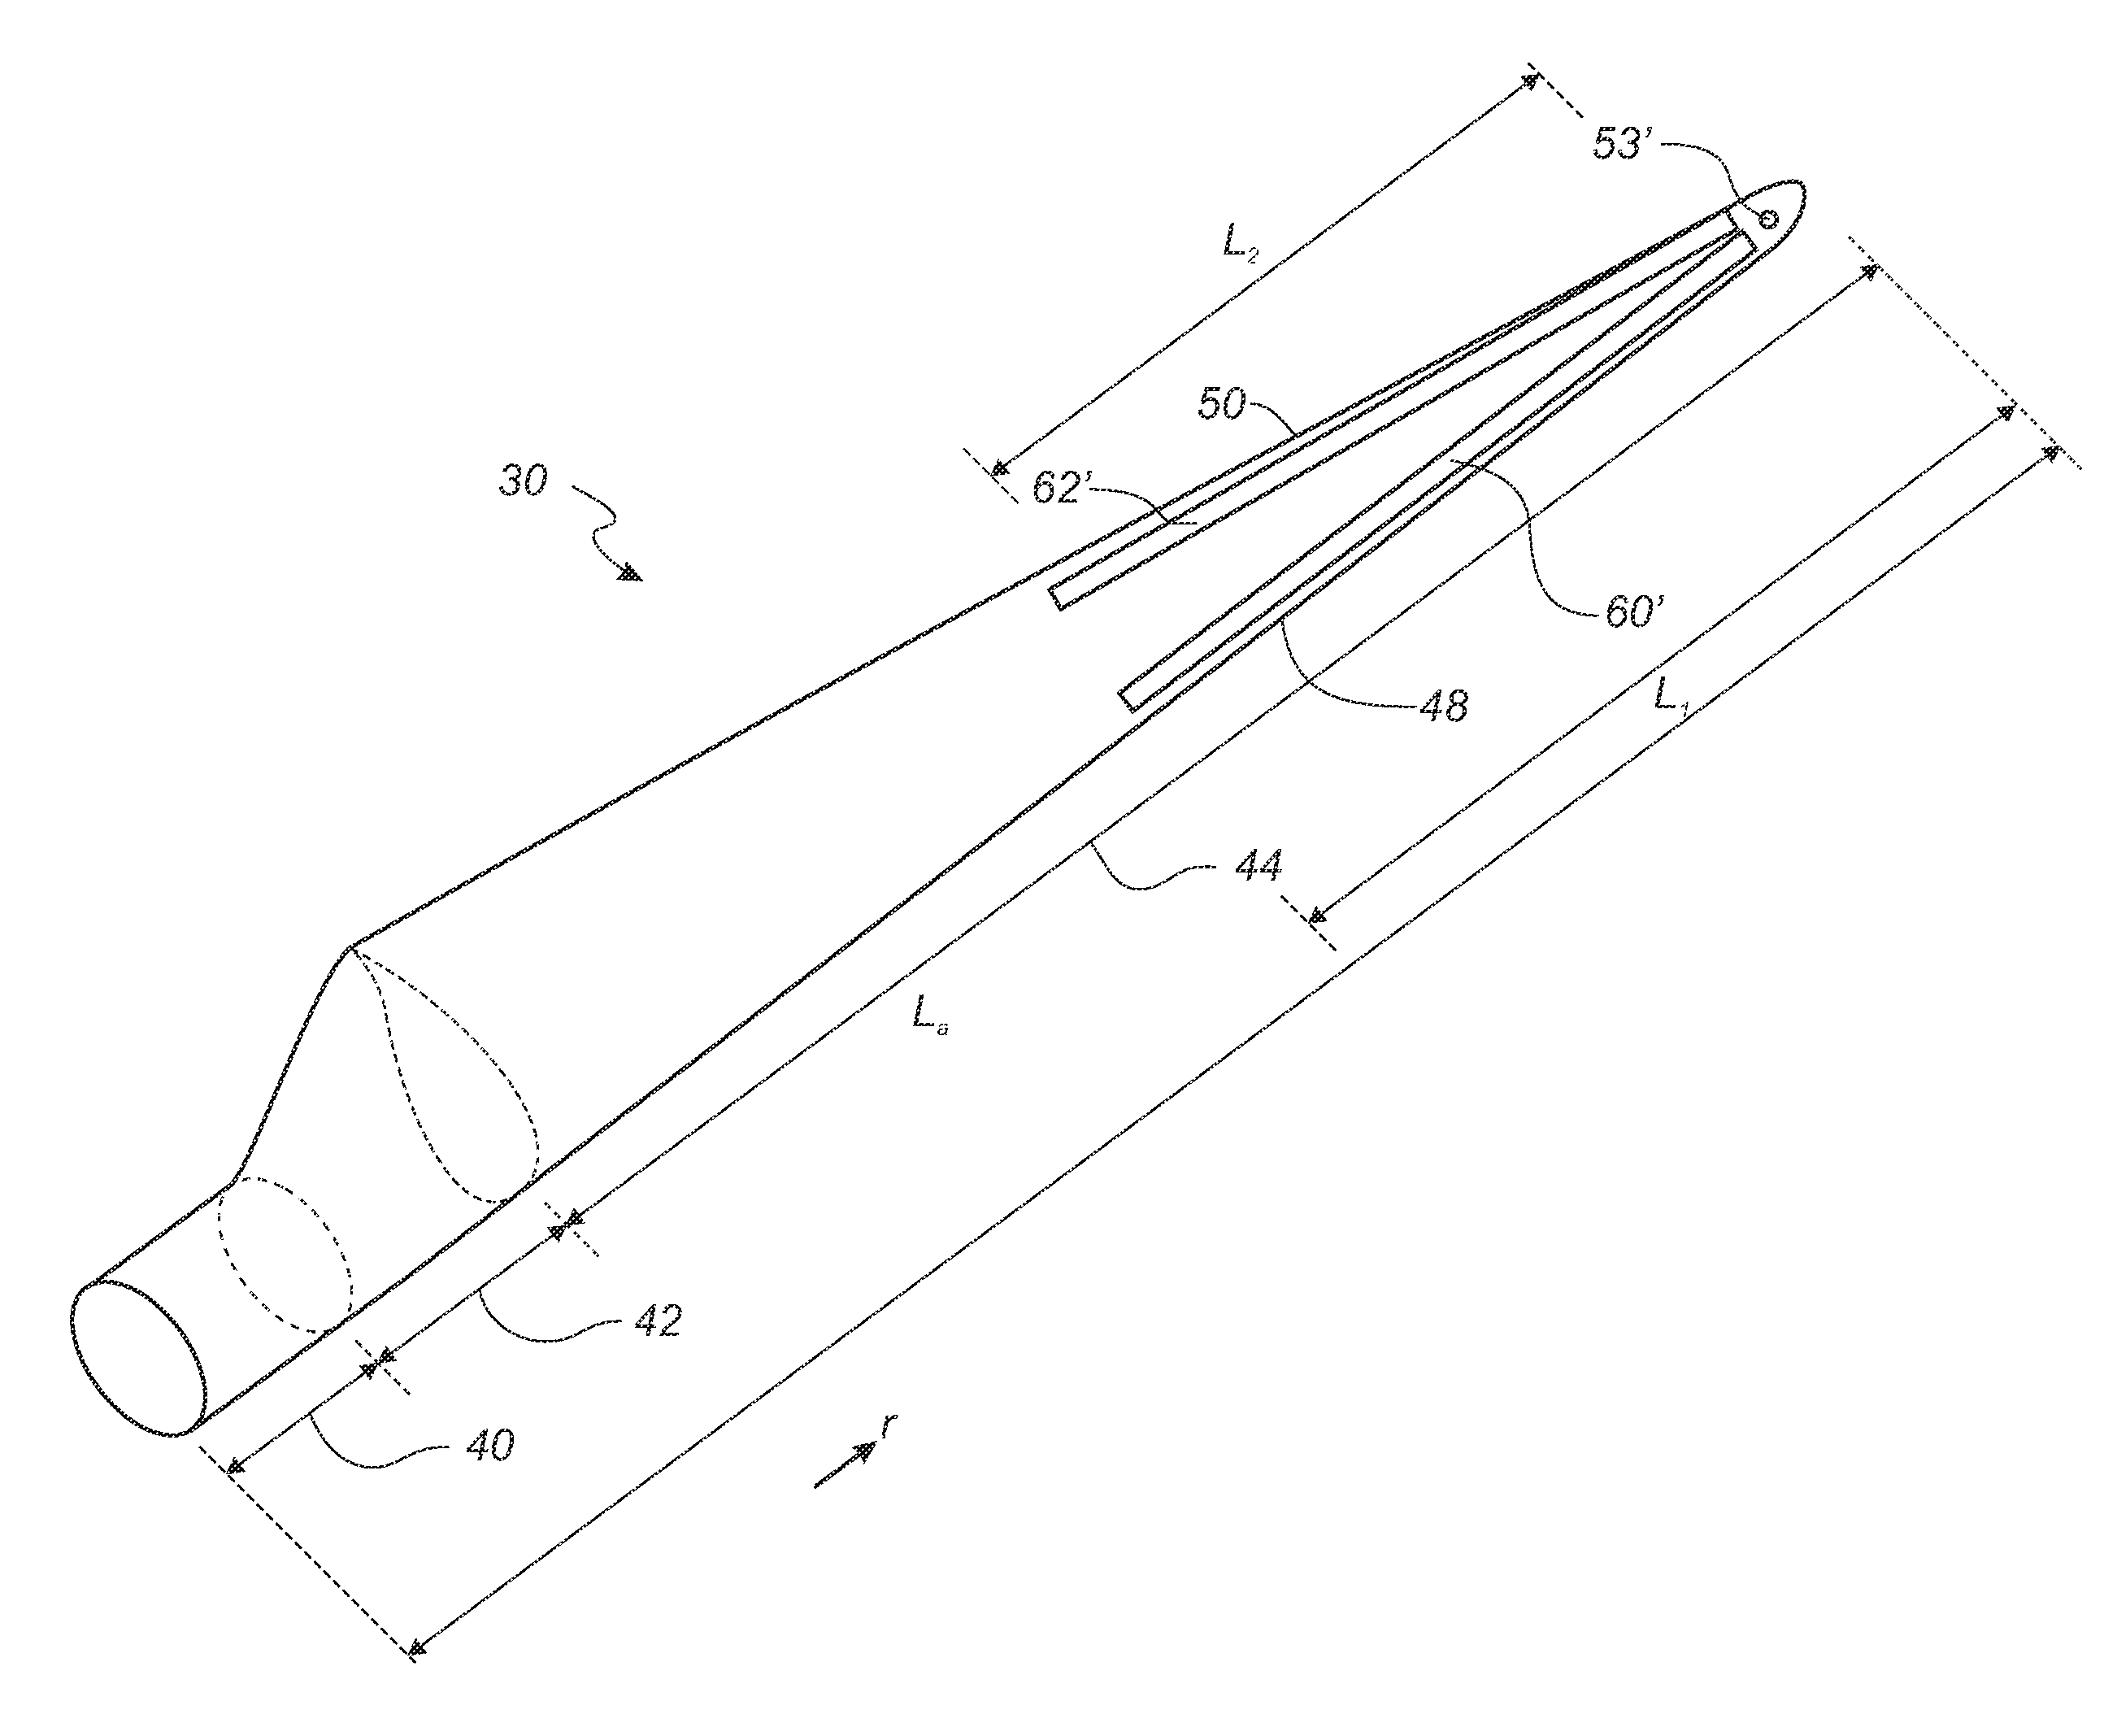 Wind turbine blade with a lightning protection system